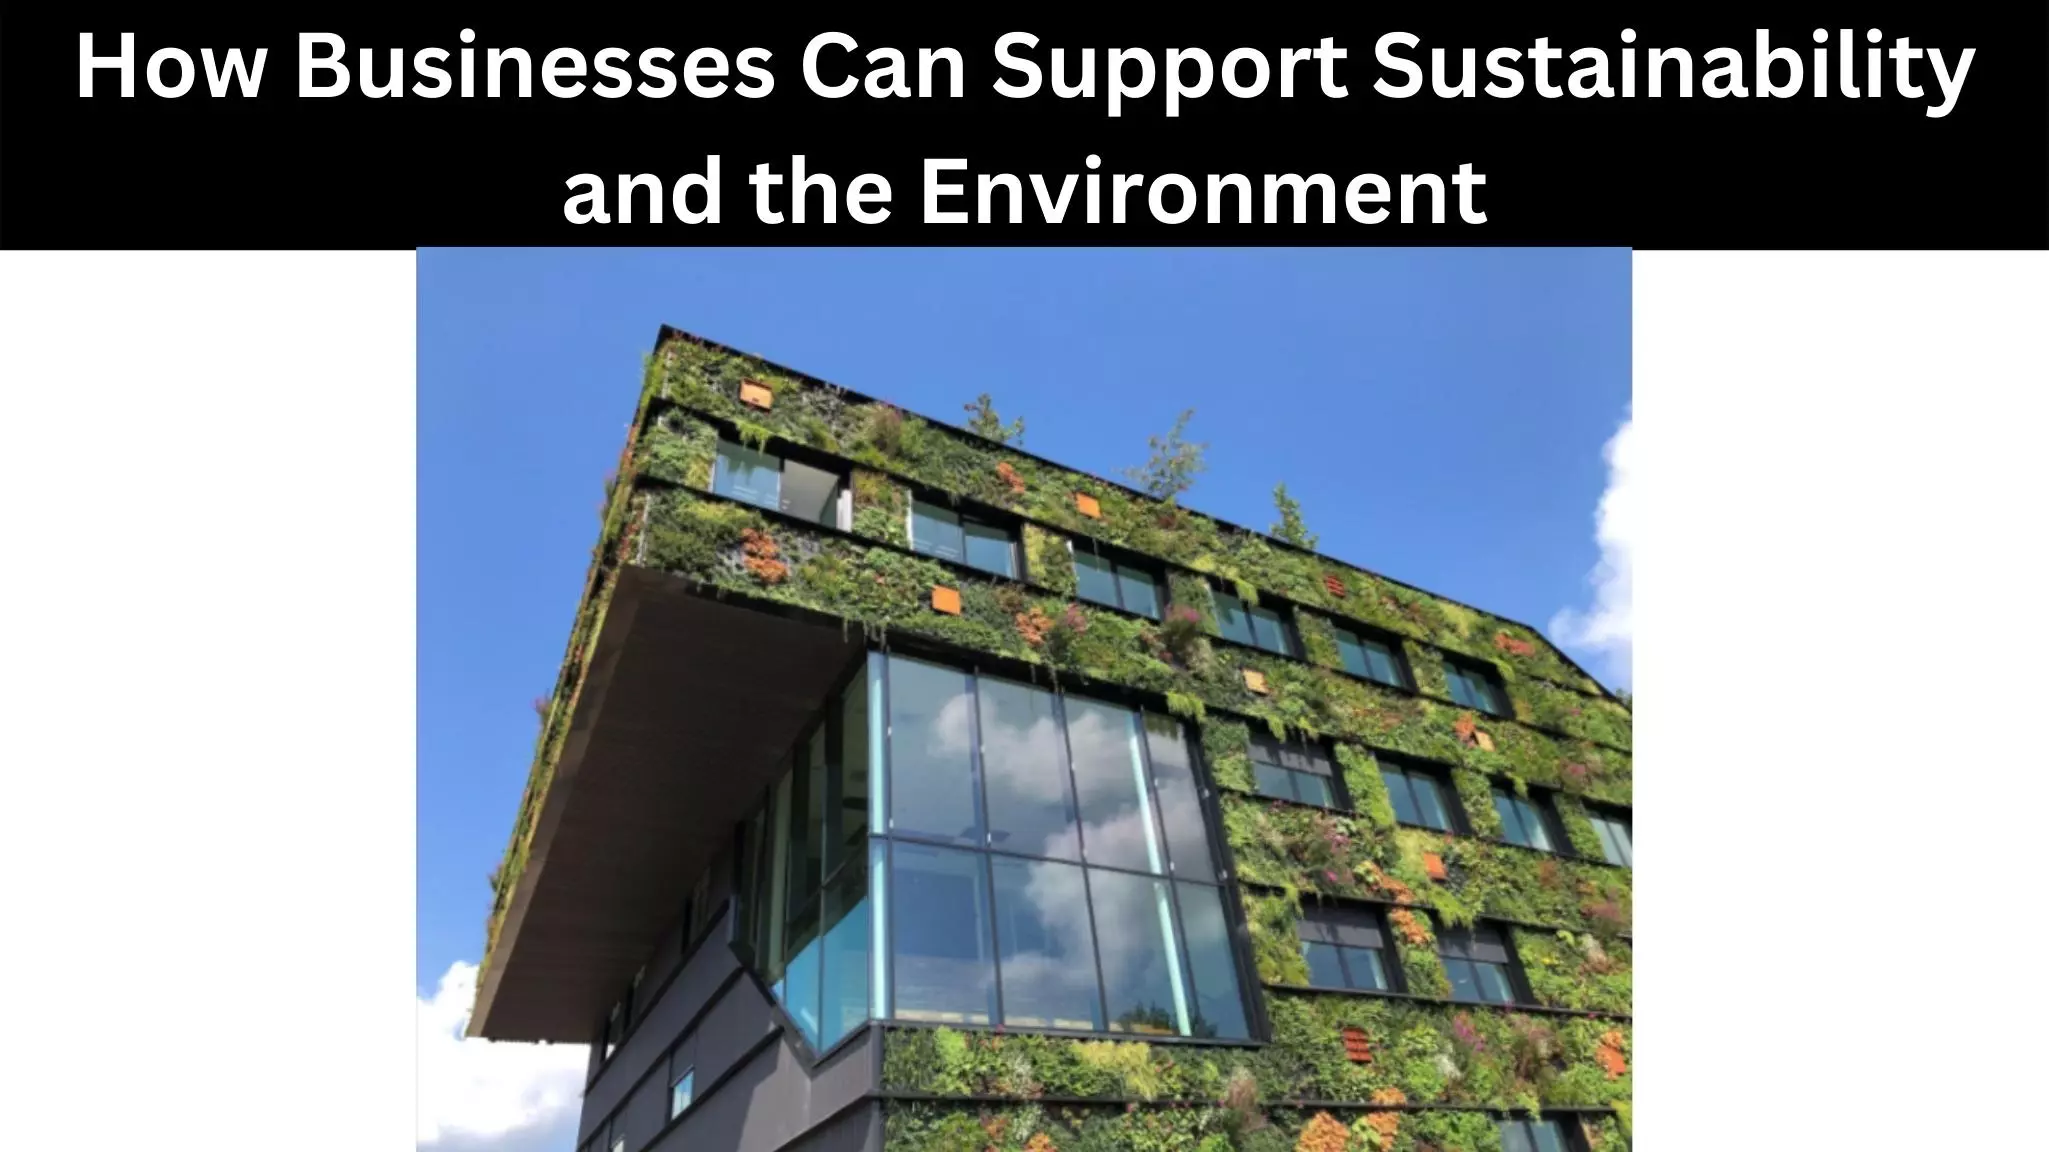 How Businesses Can Support Sustainability and the Environment